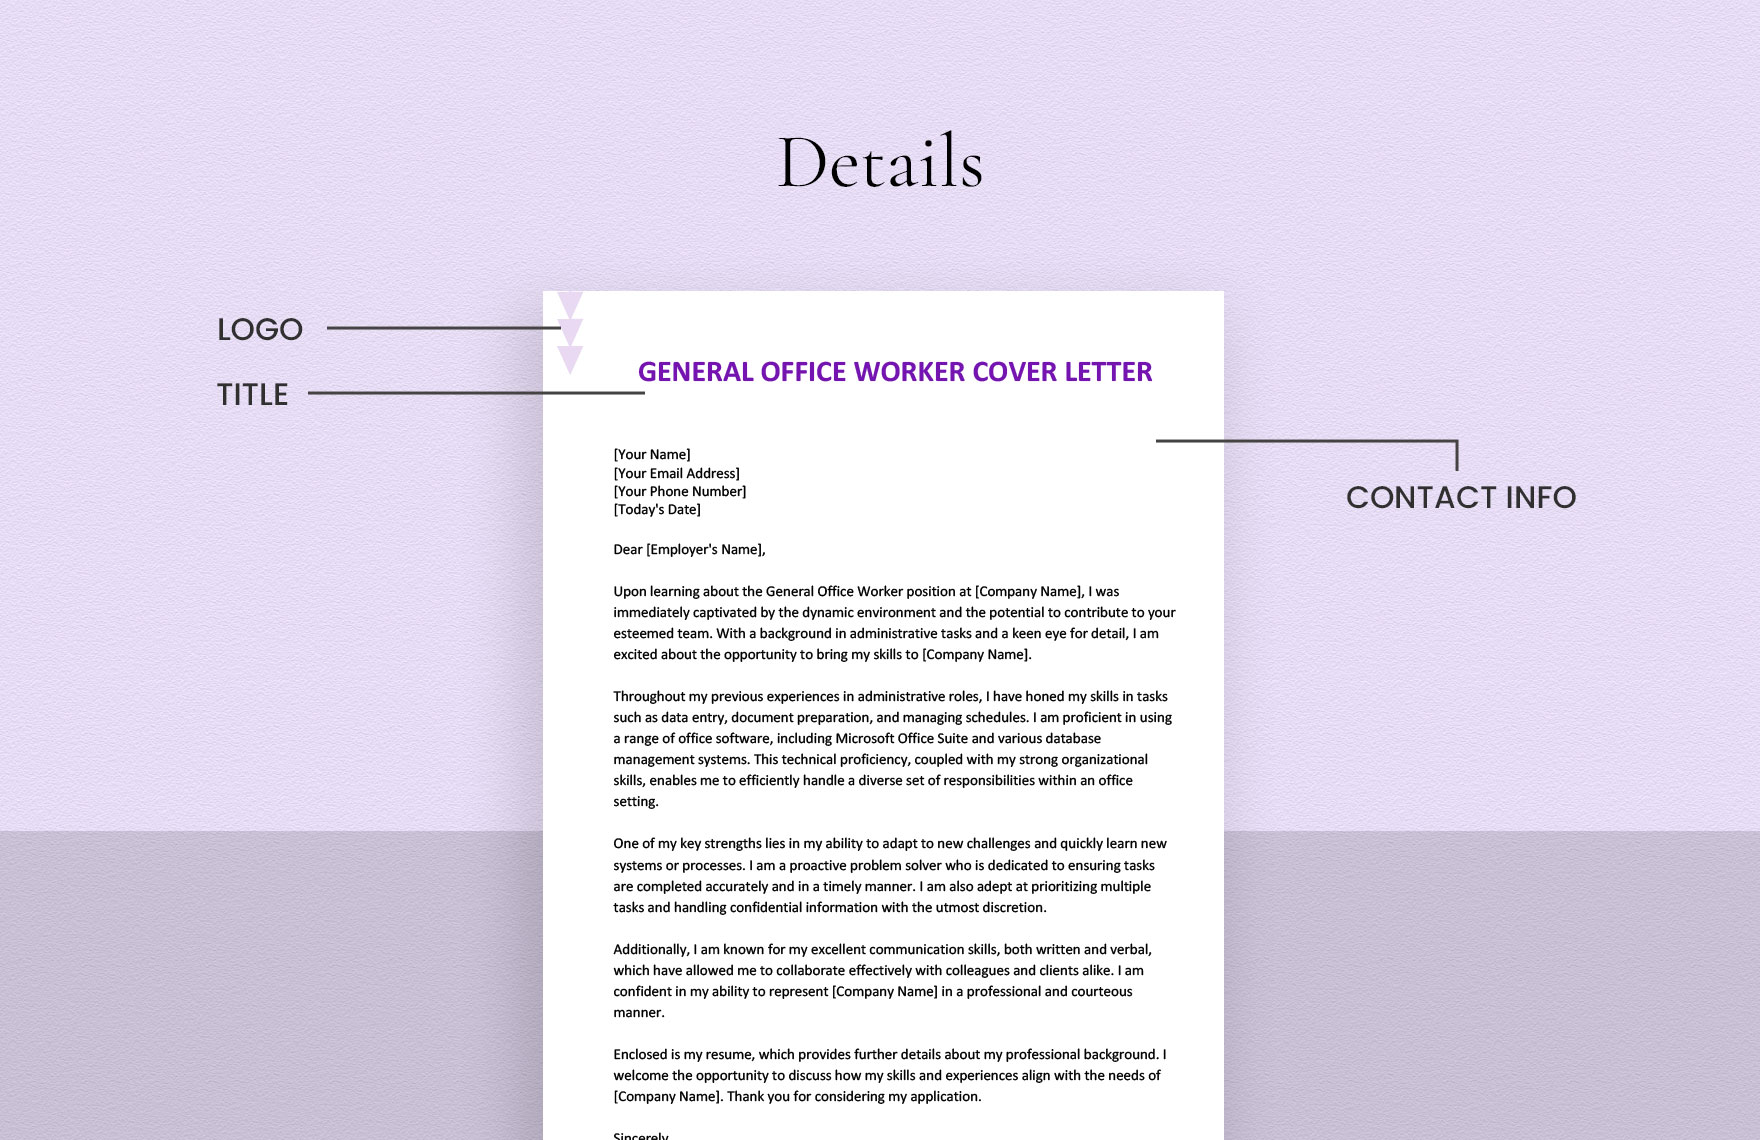 General Office Worker Cover Letter